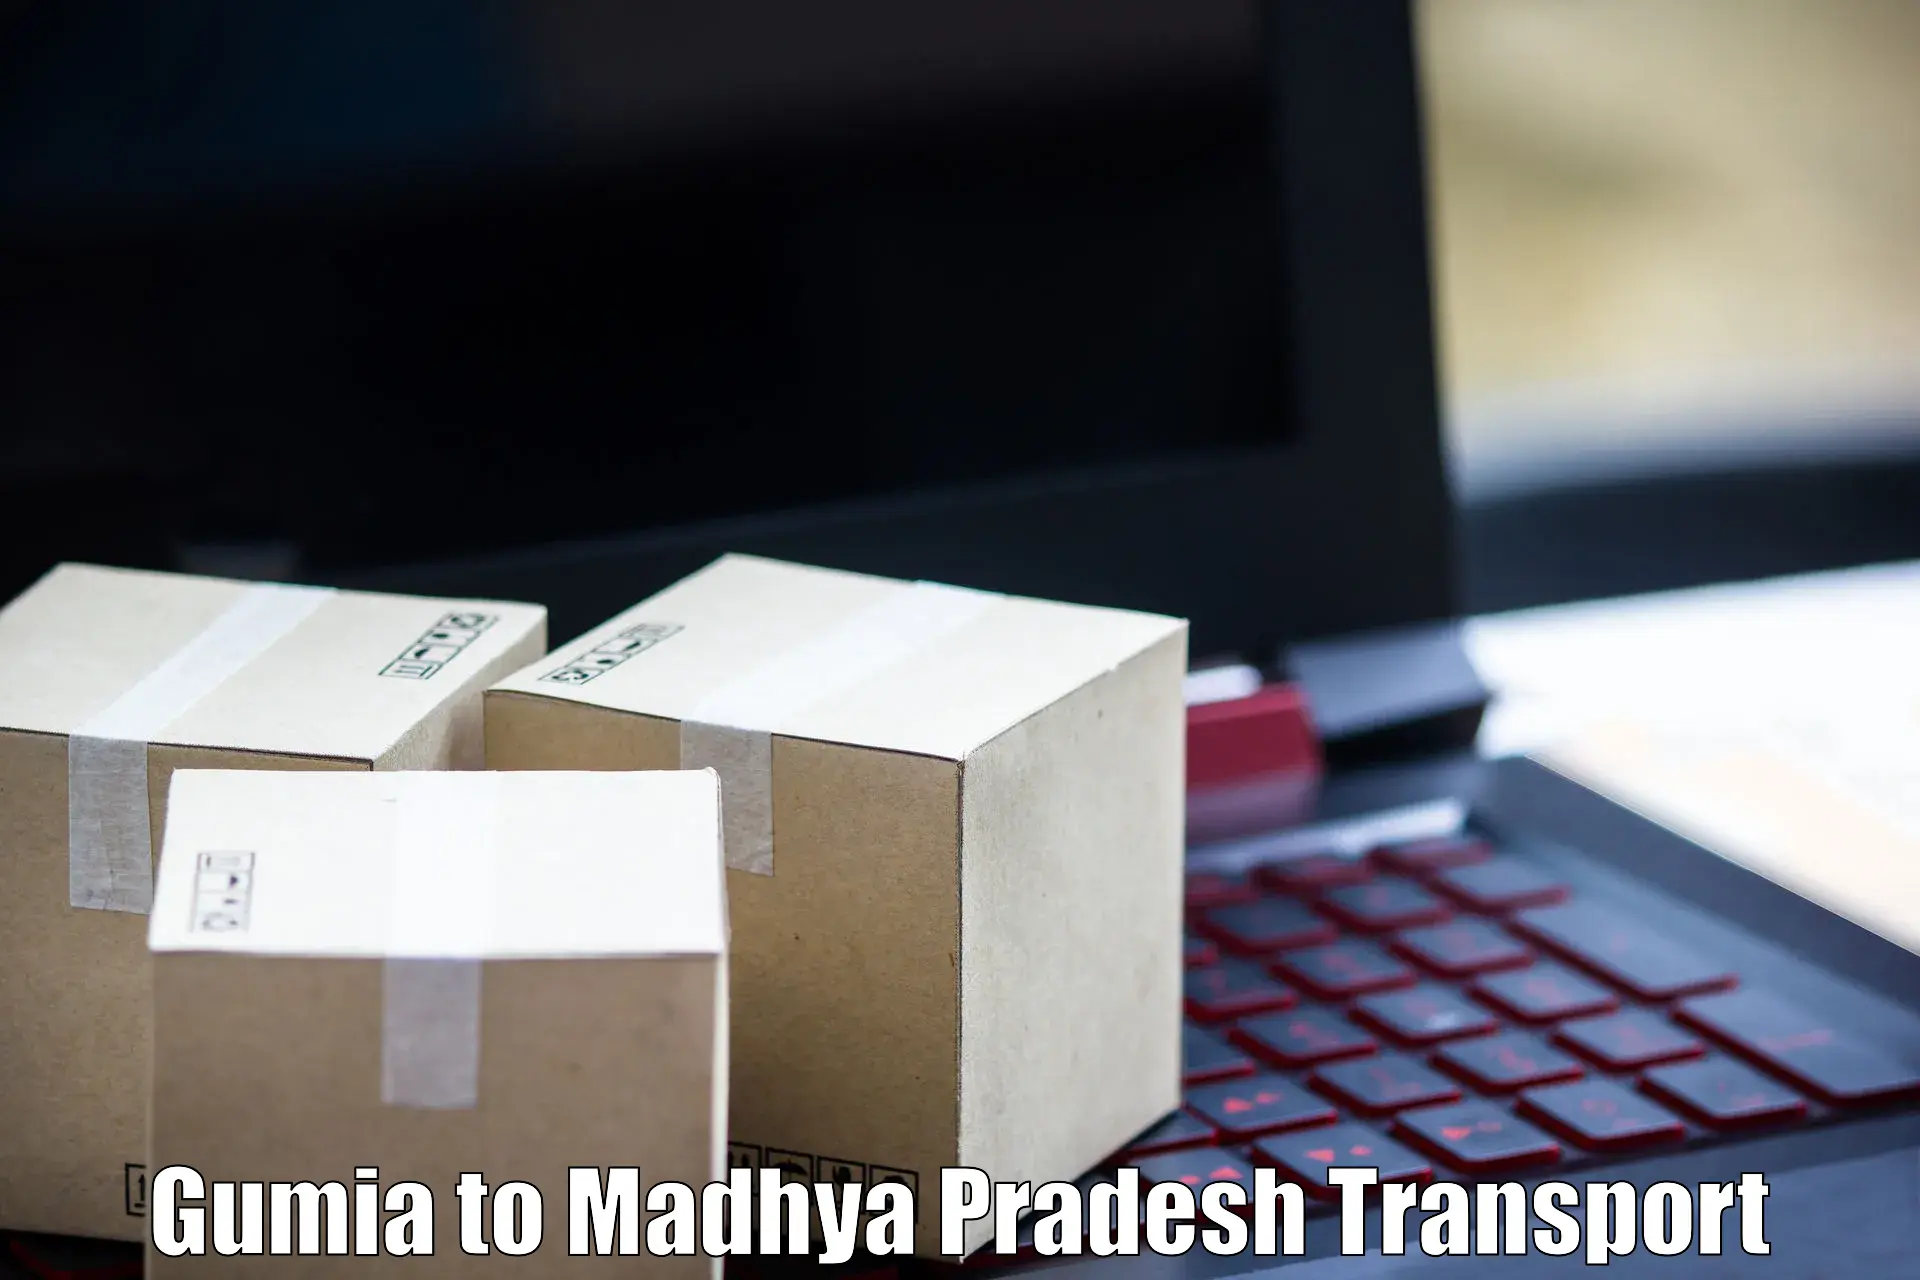 Daily parcel service transport in Gumia to Madwas